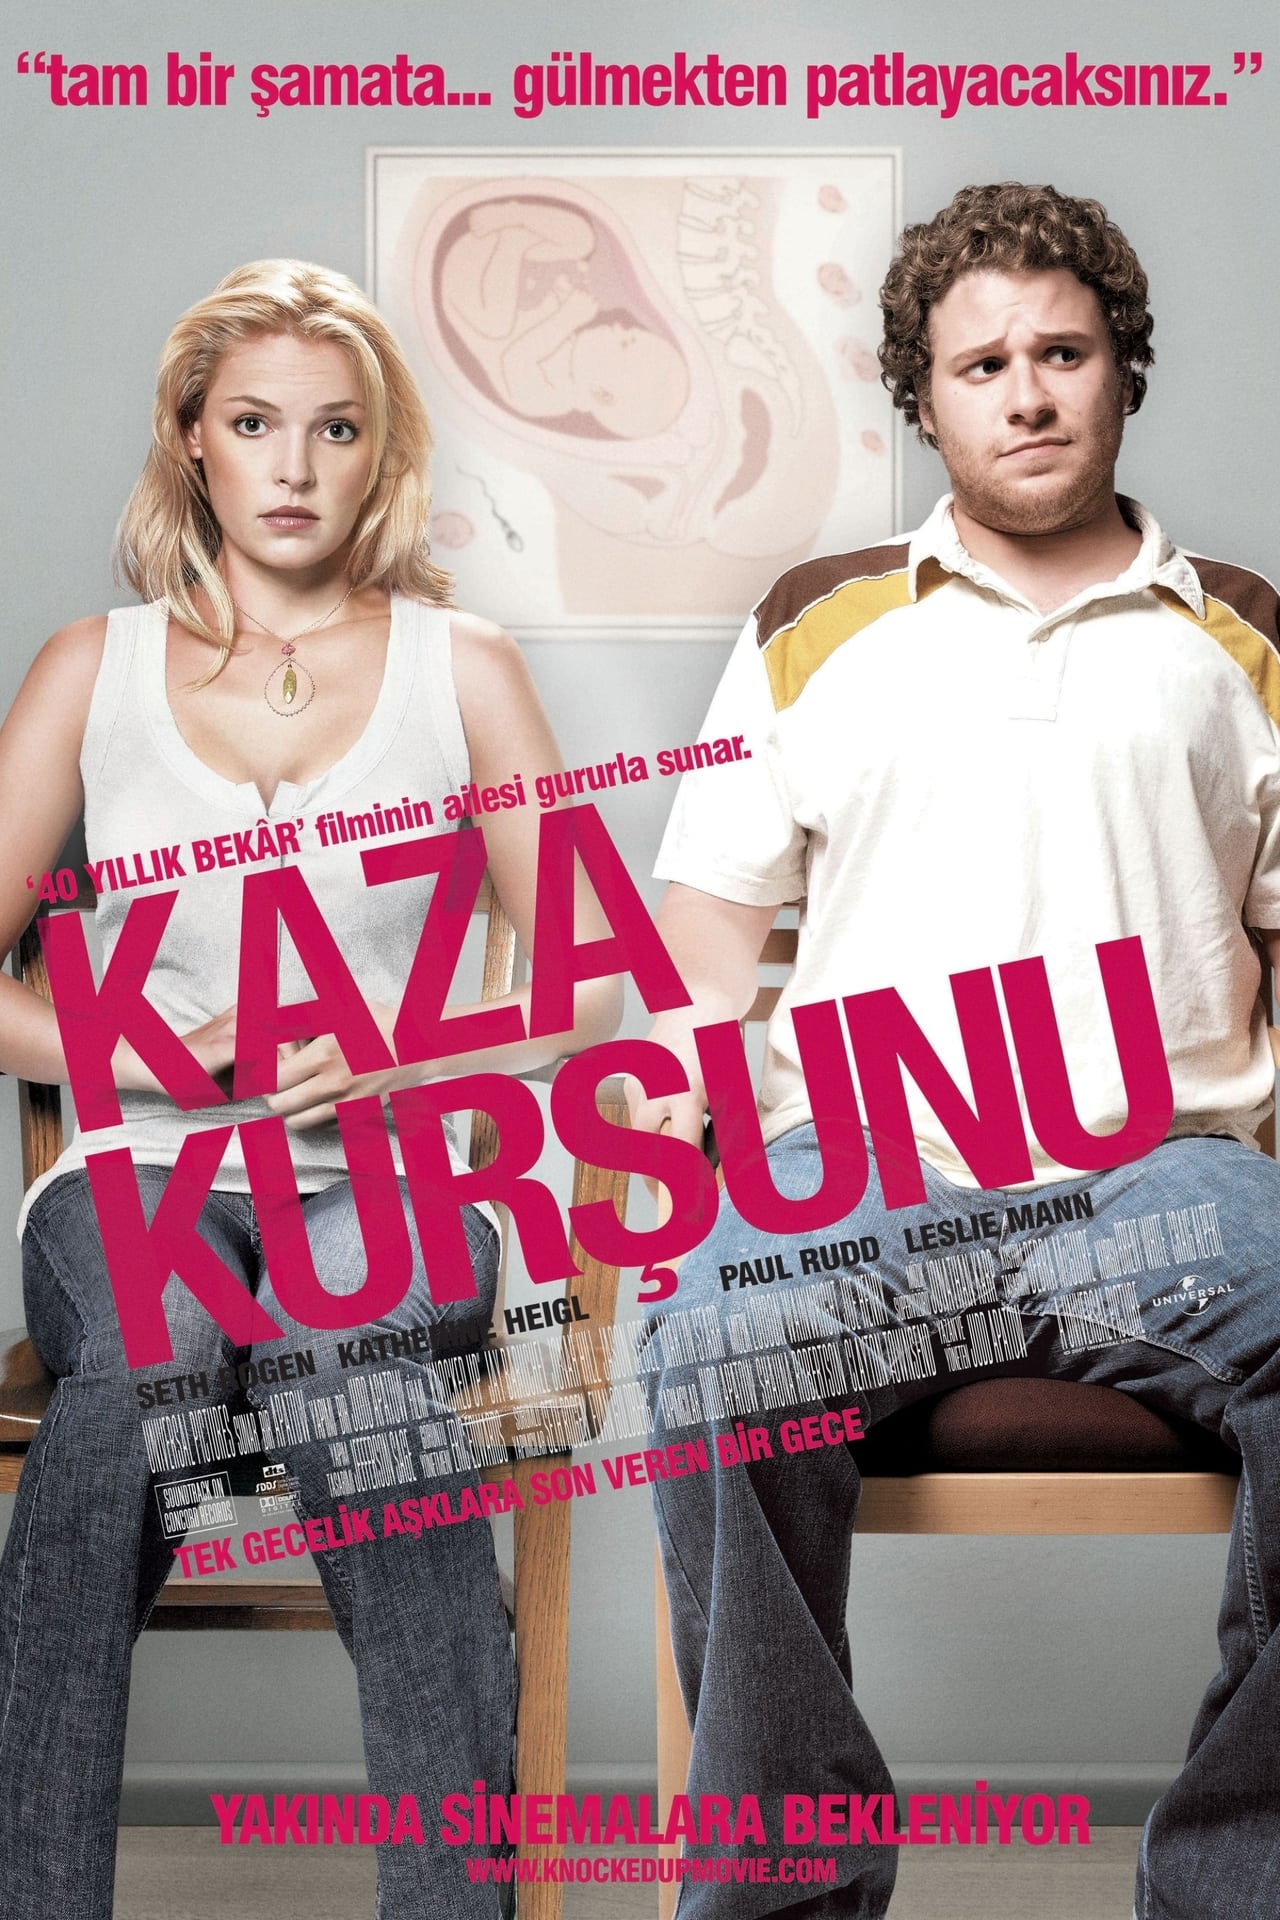 Knocked Up (2007) Unrated Cut 192Kbps 23.976Fps 48Khz 2.0Ch DVD Turkish Audio TAC